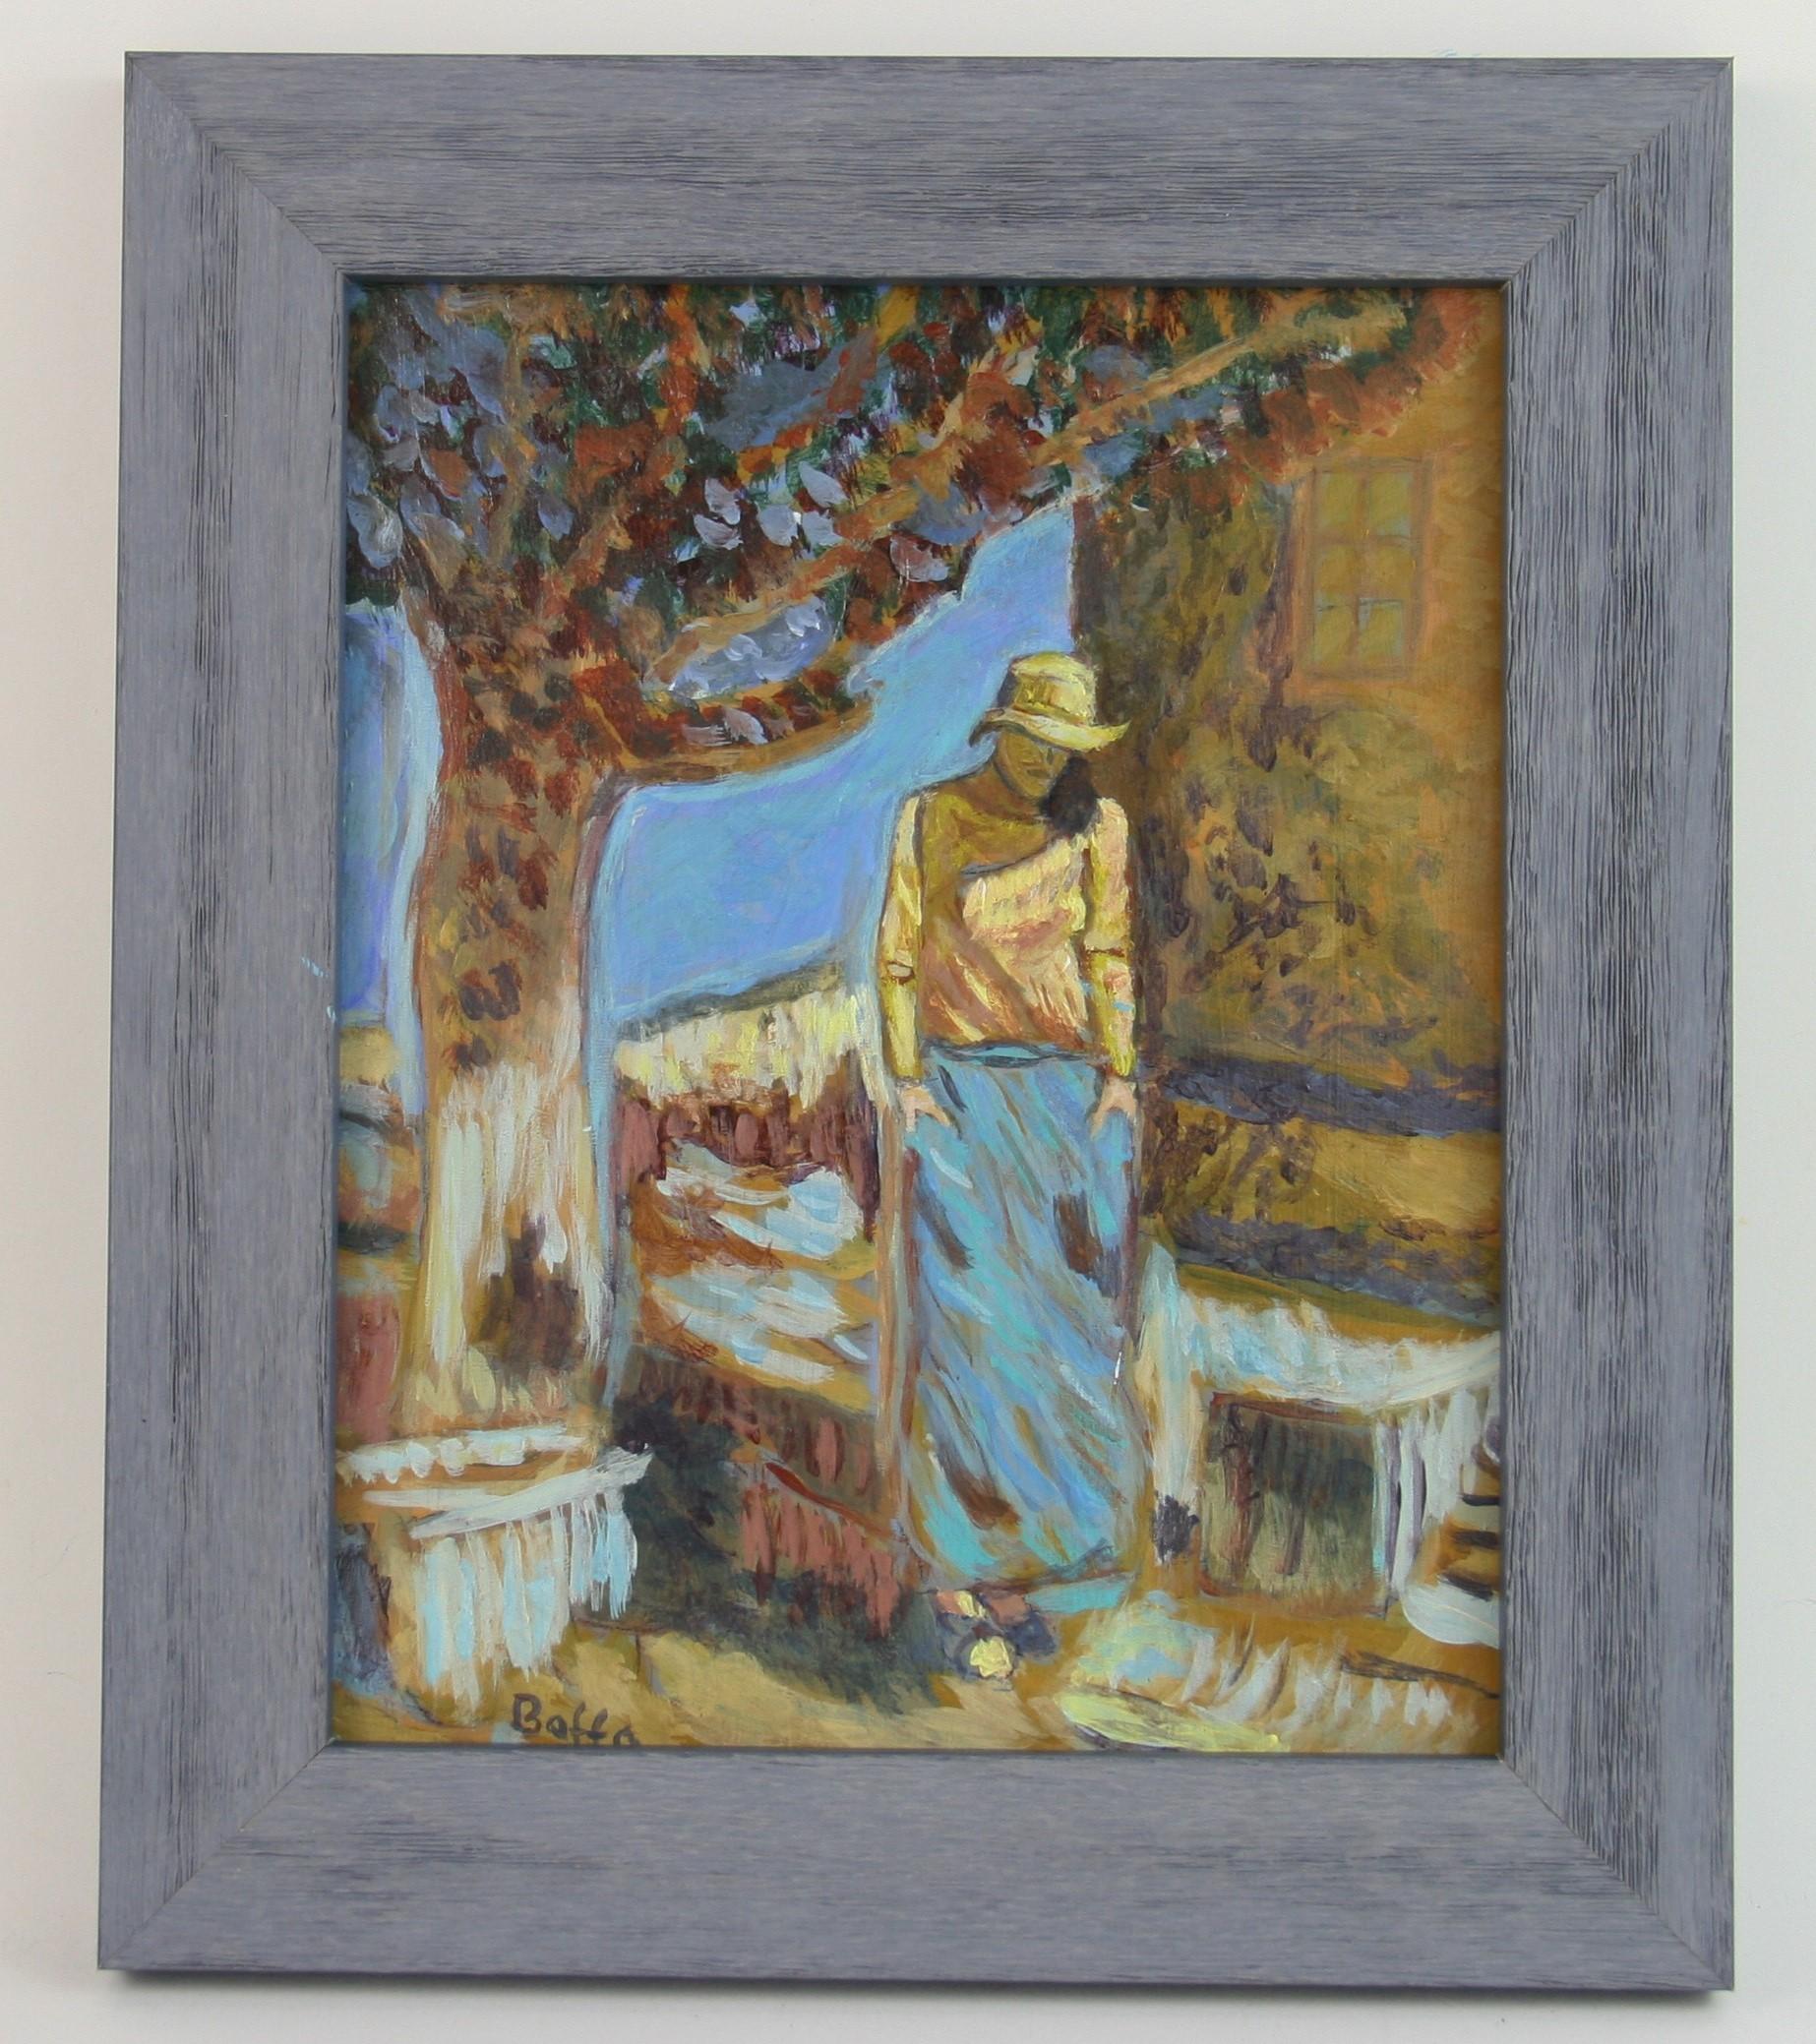 5-3291 Impressionistic  figurative painting,original acrylic on board ,signed by Boffa ,set in a grey  wood  frame.Image size 9.50 H x 7.50 W